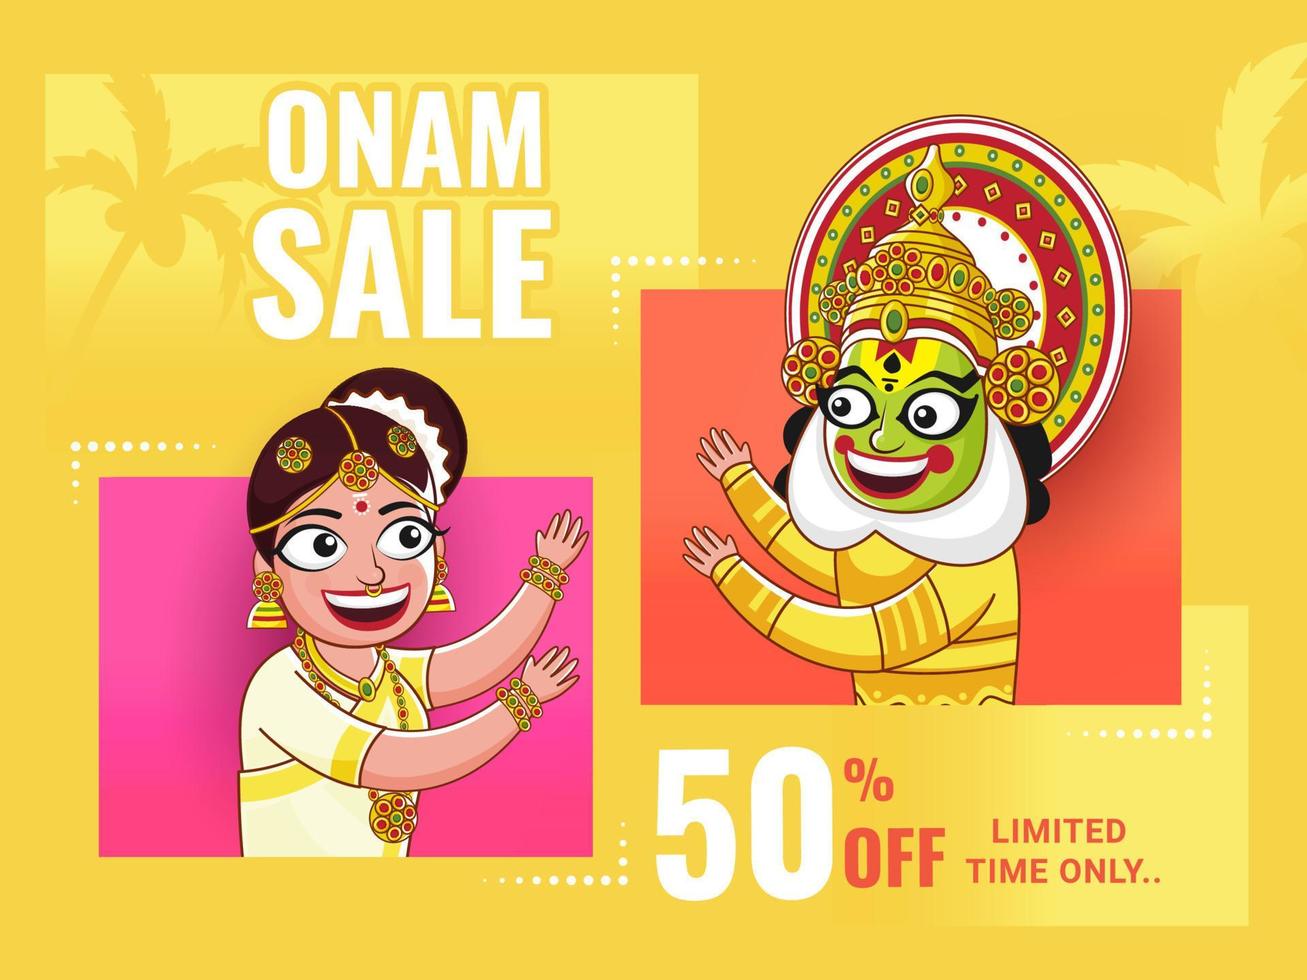 Onam Sale Poster Design with Discount Offer, Cheerful Woman and Kathakali Dancer on Yellow Background. vector